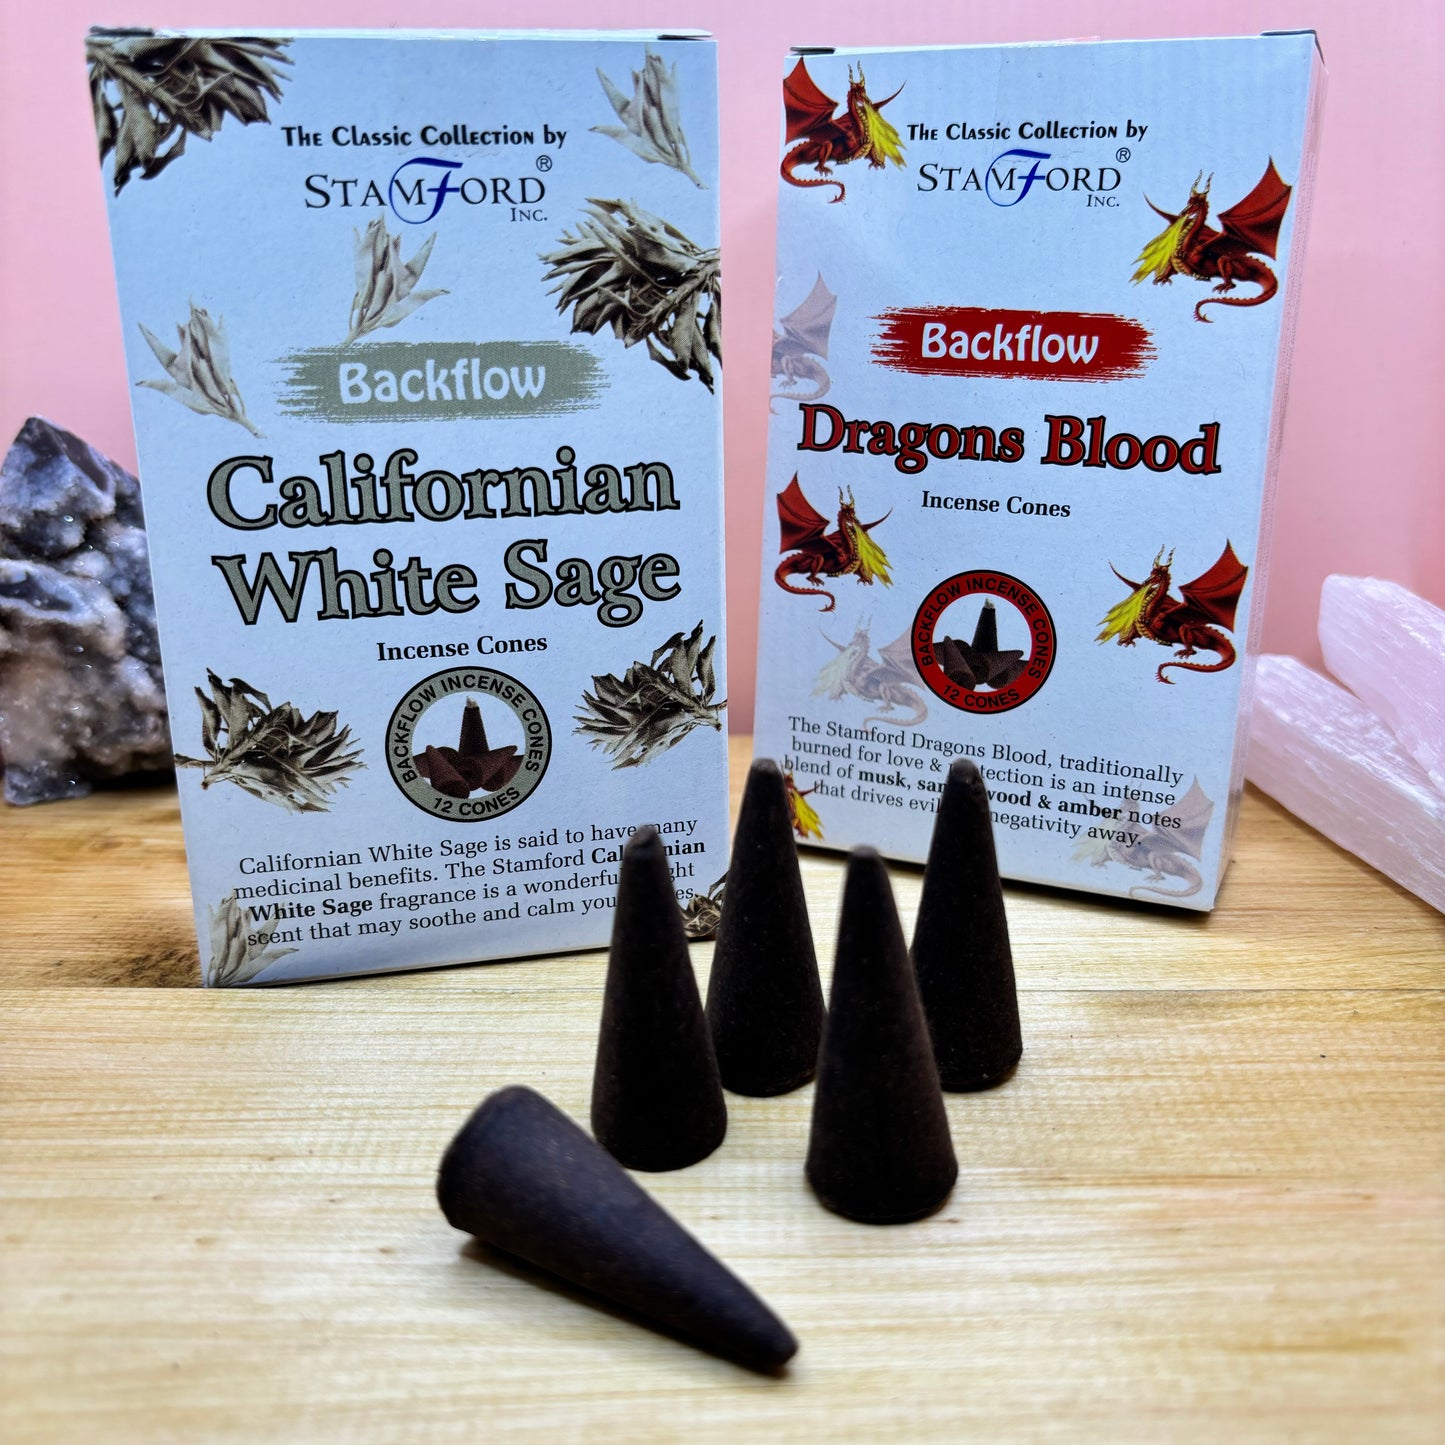 Cleansing Collection: Backflow Incense Cones